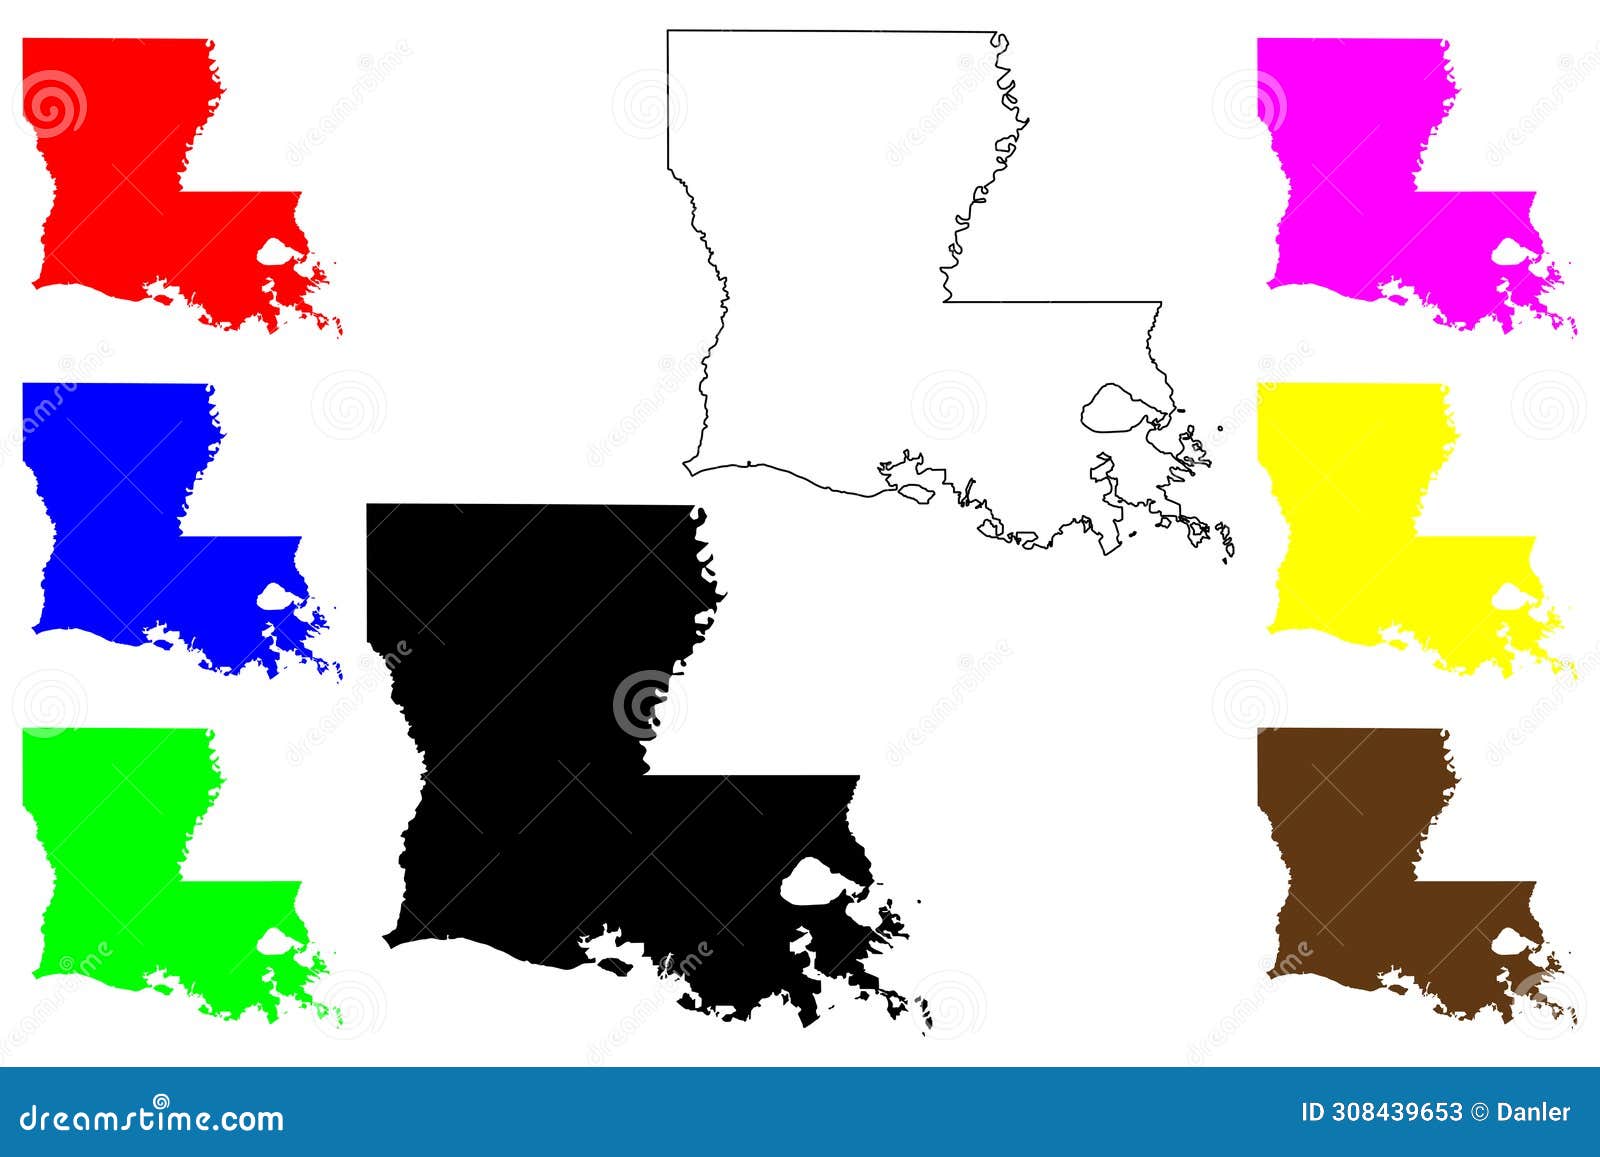 state of louisiana (united states of america, usa or u.s.a.) silhouette and outline louisiane, luisiana or lwizyan map